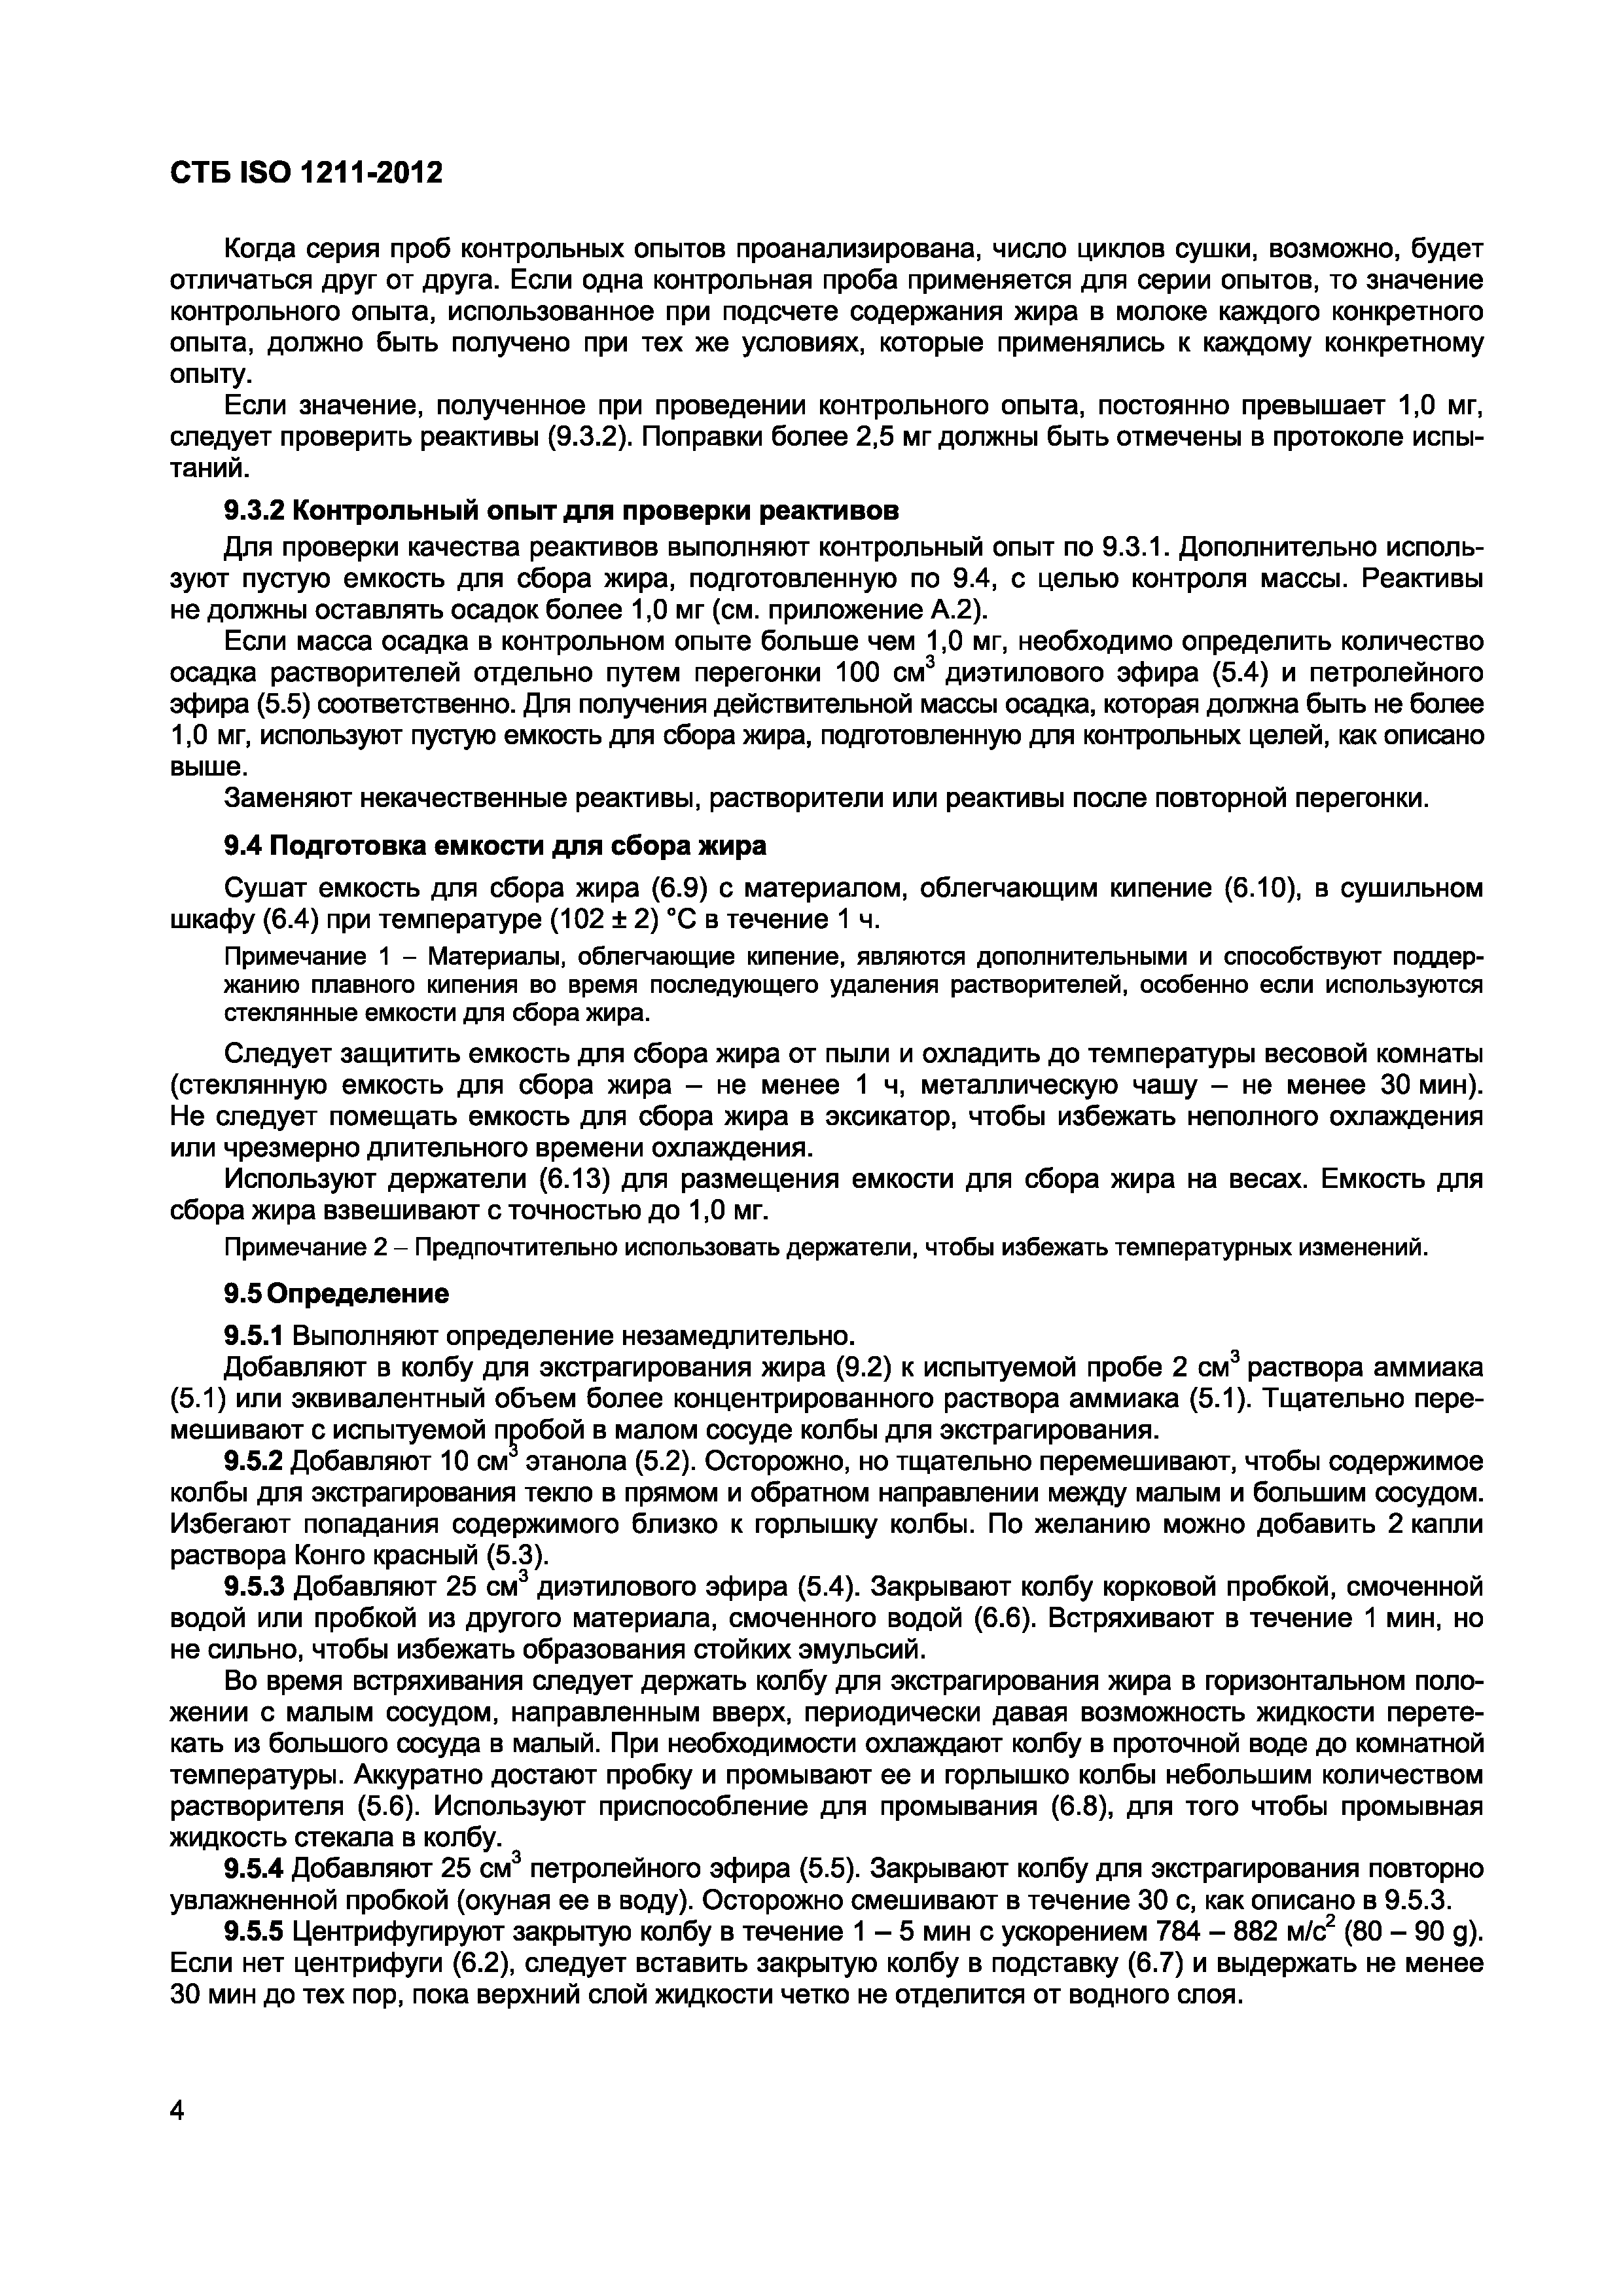 СТБ ISO 1211-2012